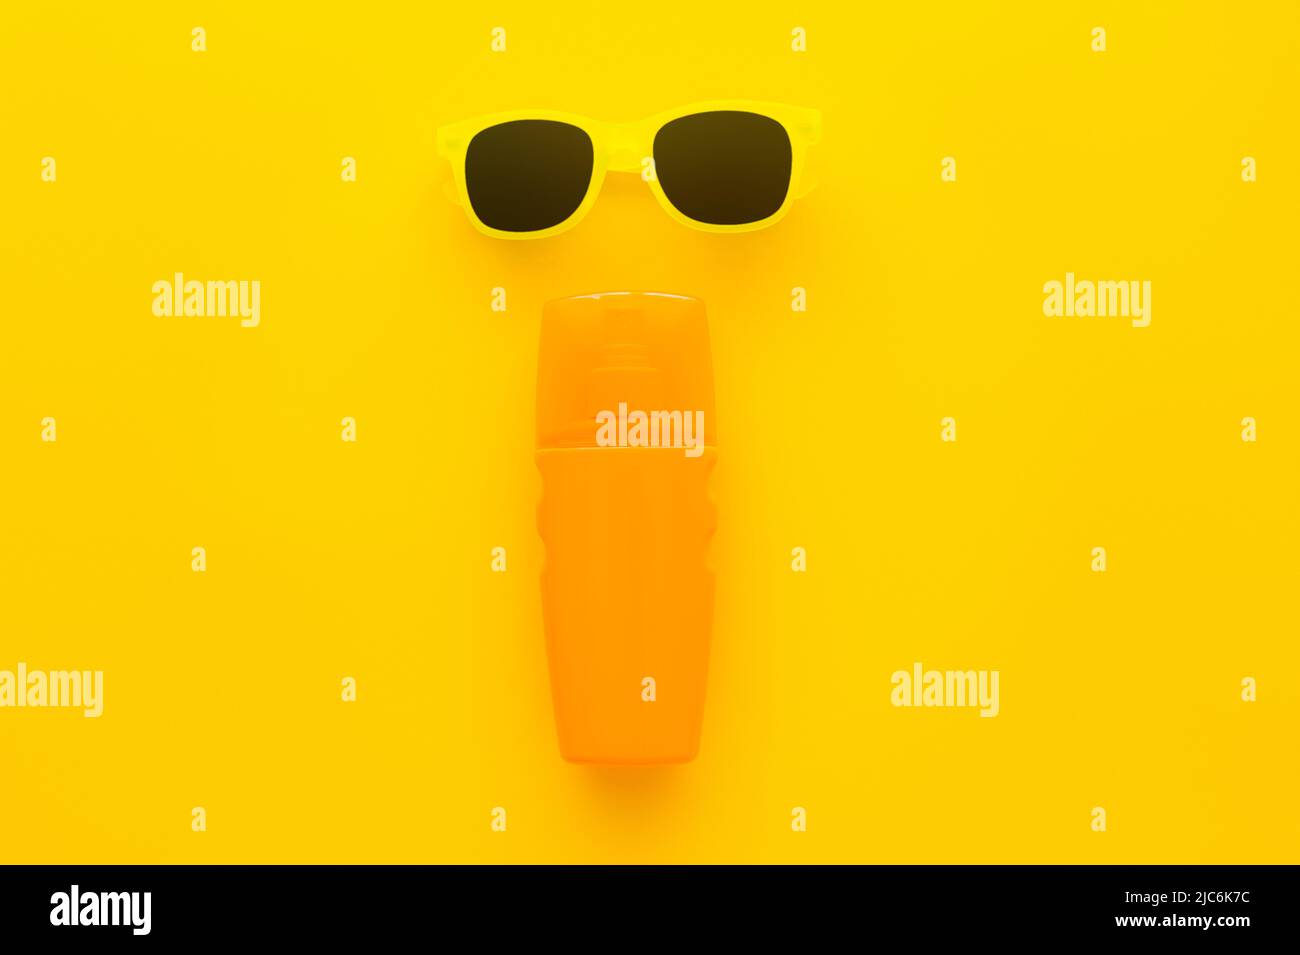 Top view of sunglasses and bottle of sunscreen on yellow background Stock Photo